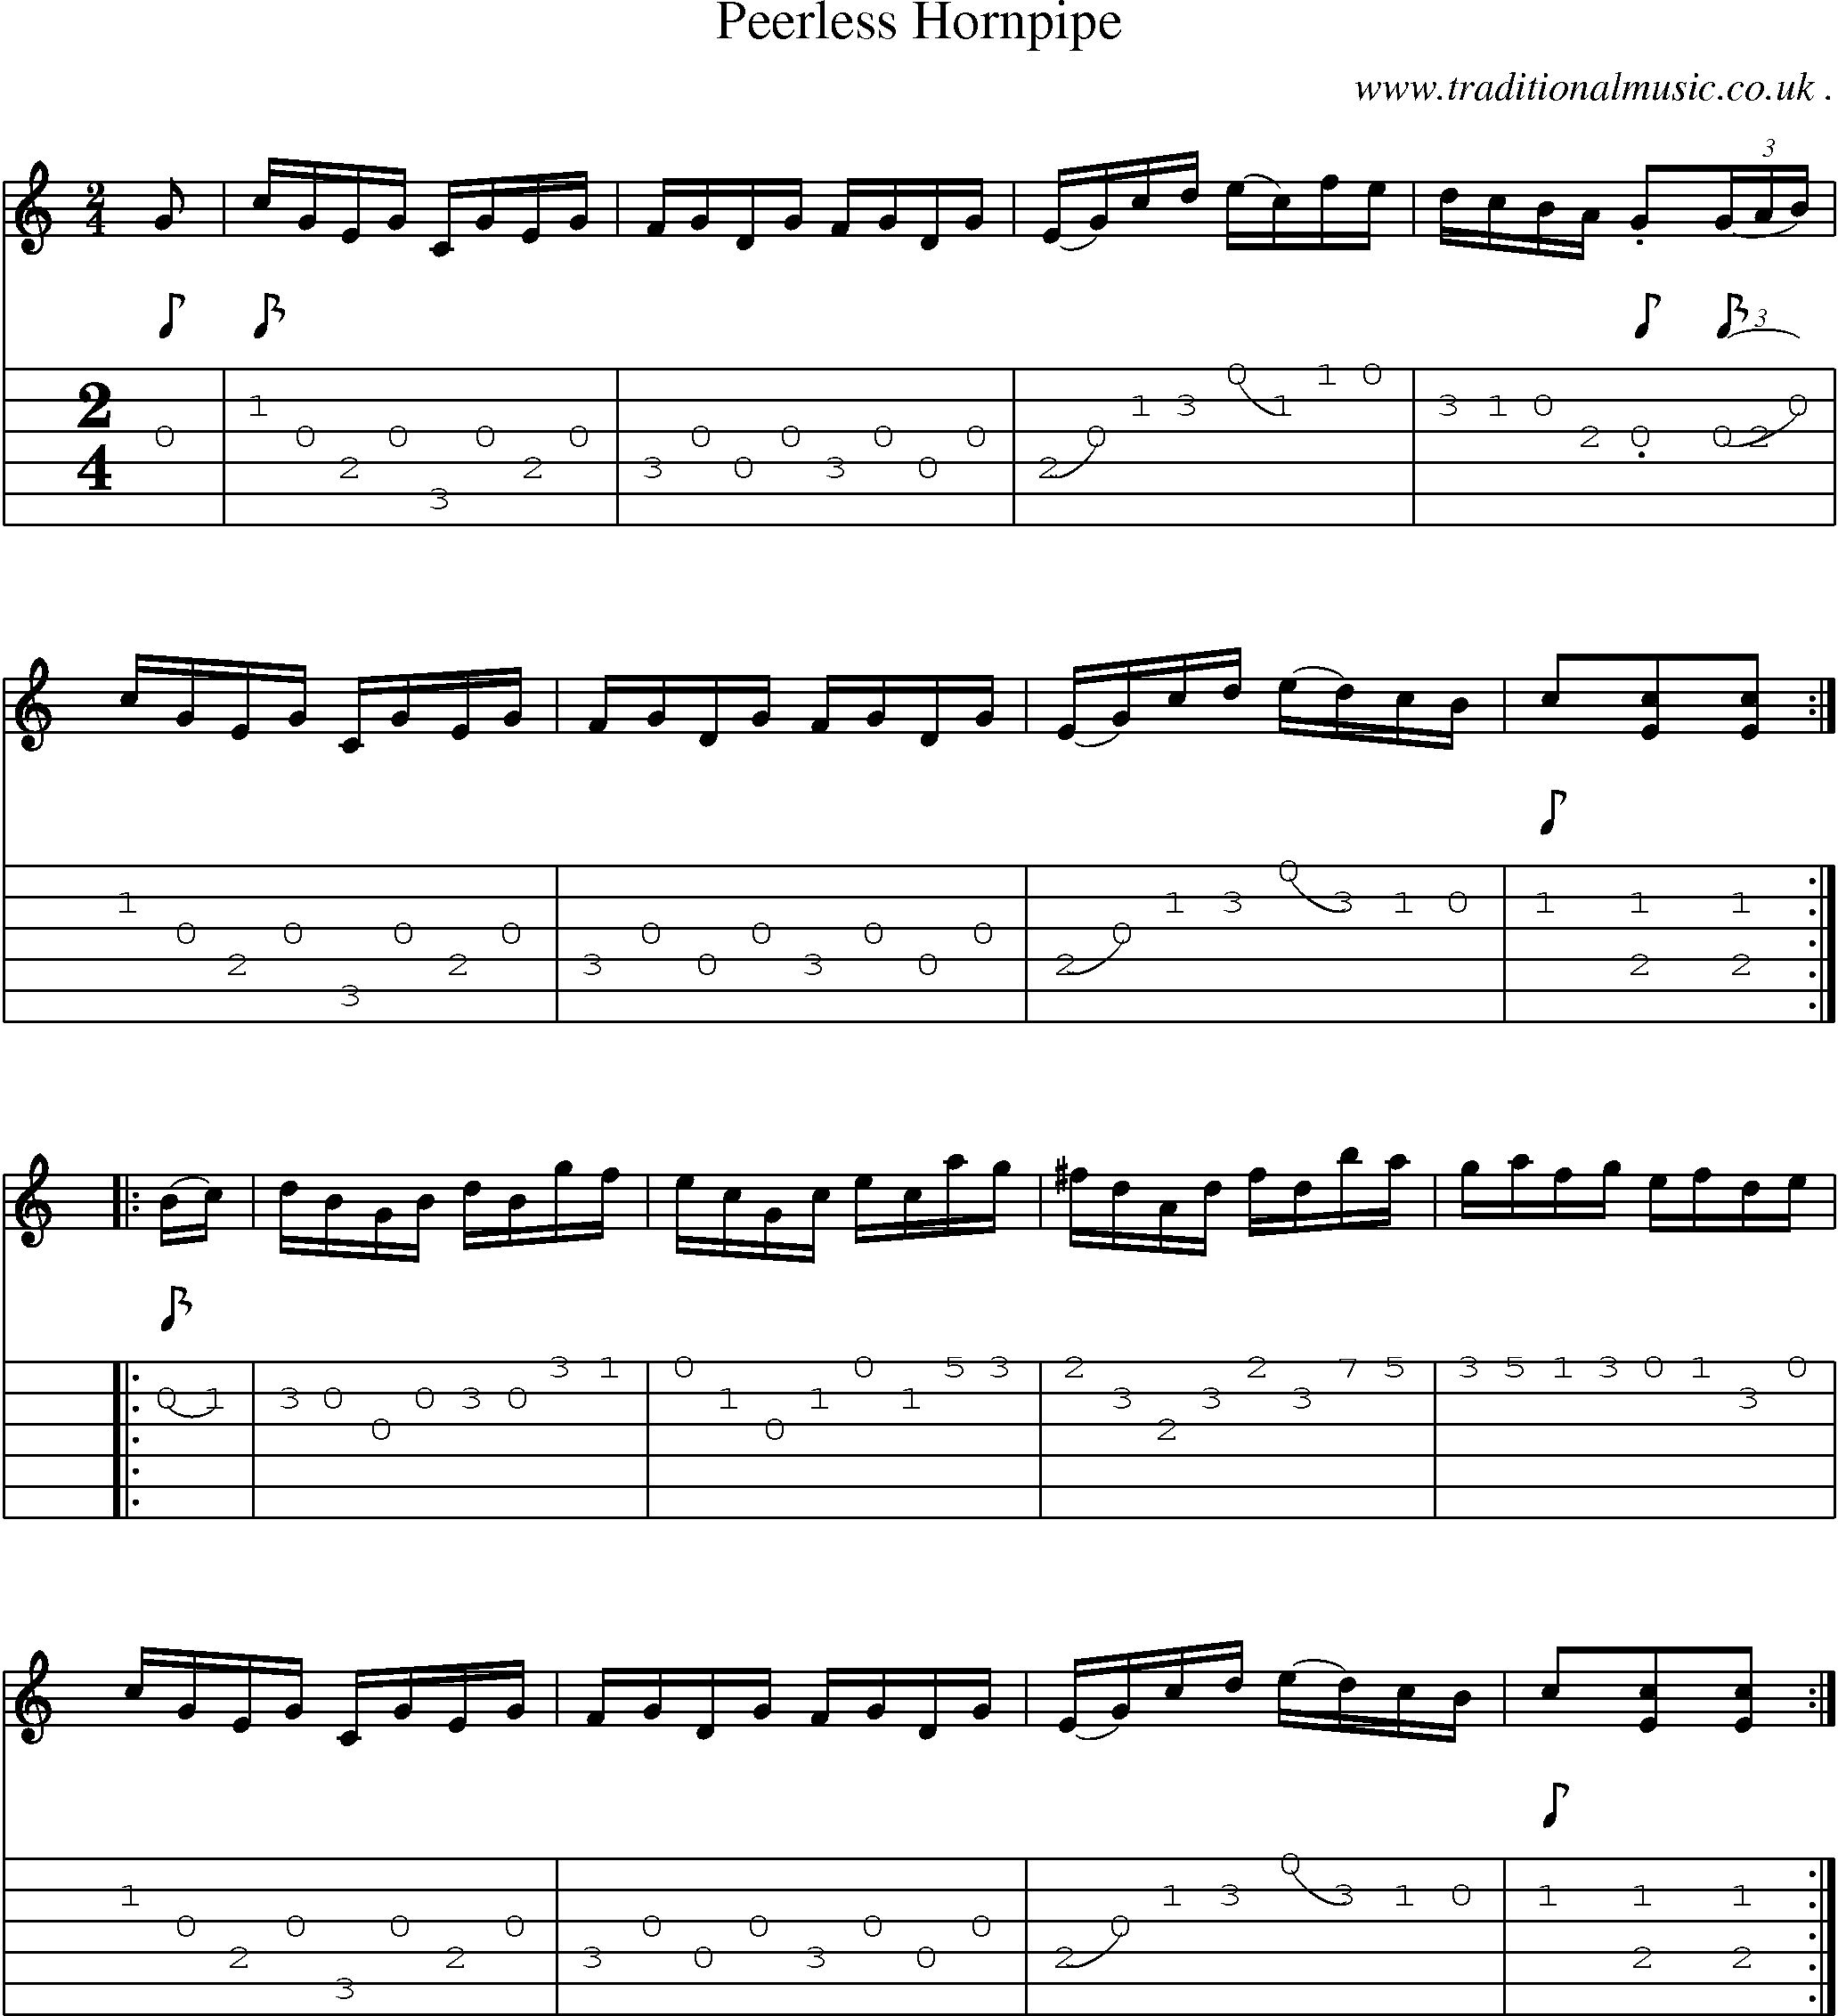 Sheet-Music and Guitar Tabs for Peerless Hornpipe